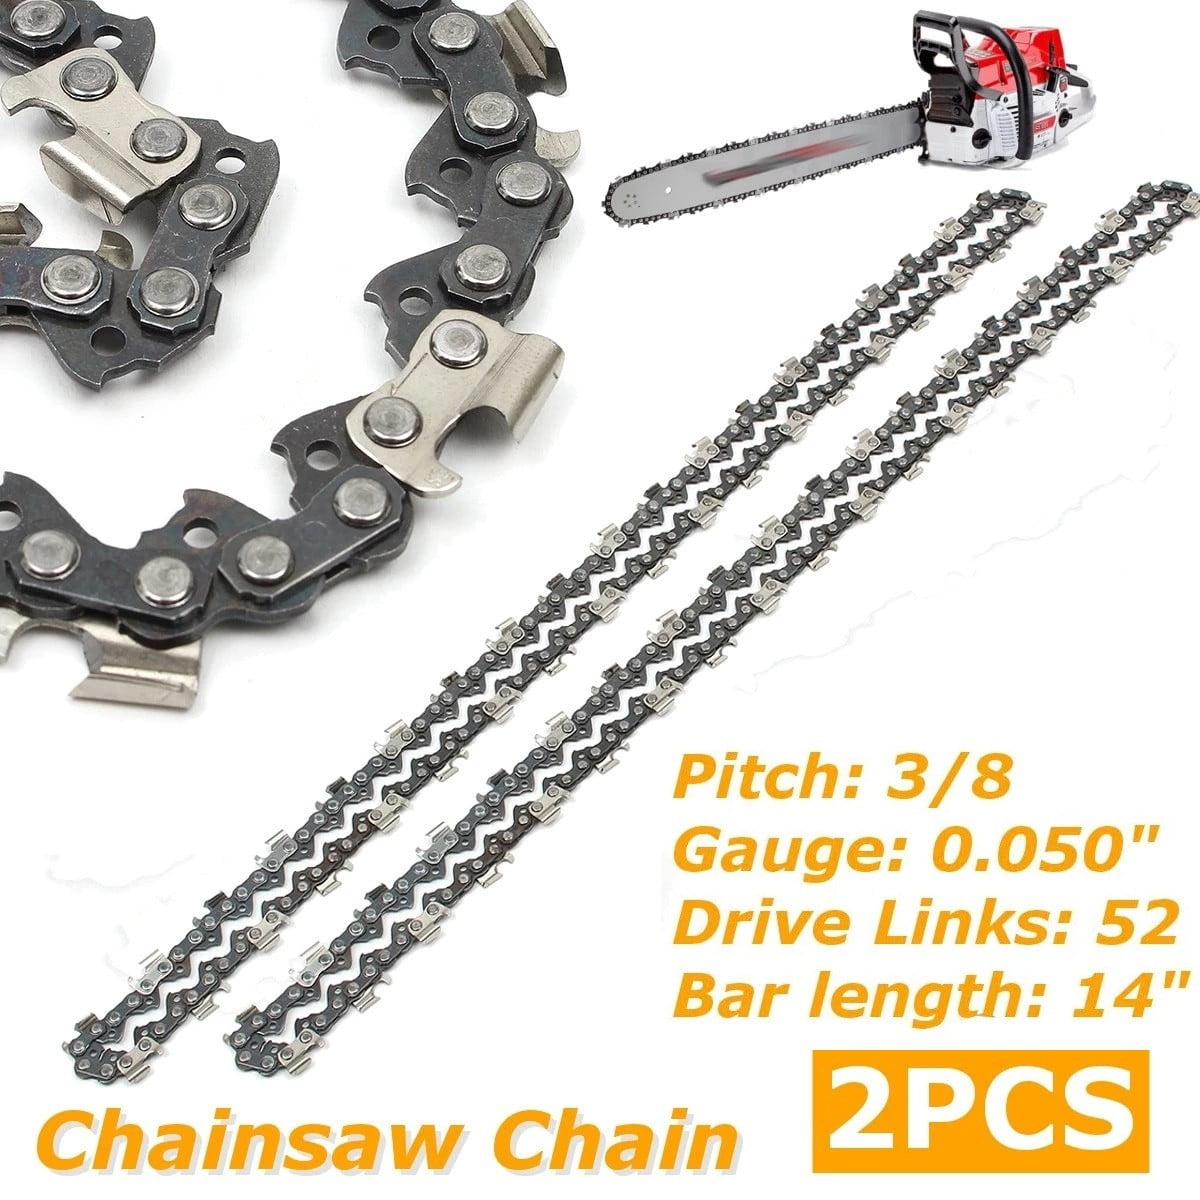 14" 3/8" Pitch 0.050" Gauge 50DL Chainsaw Chain Fit STIHL MS170 MS180 MS250 